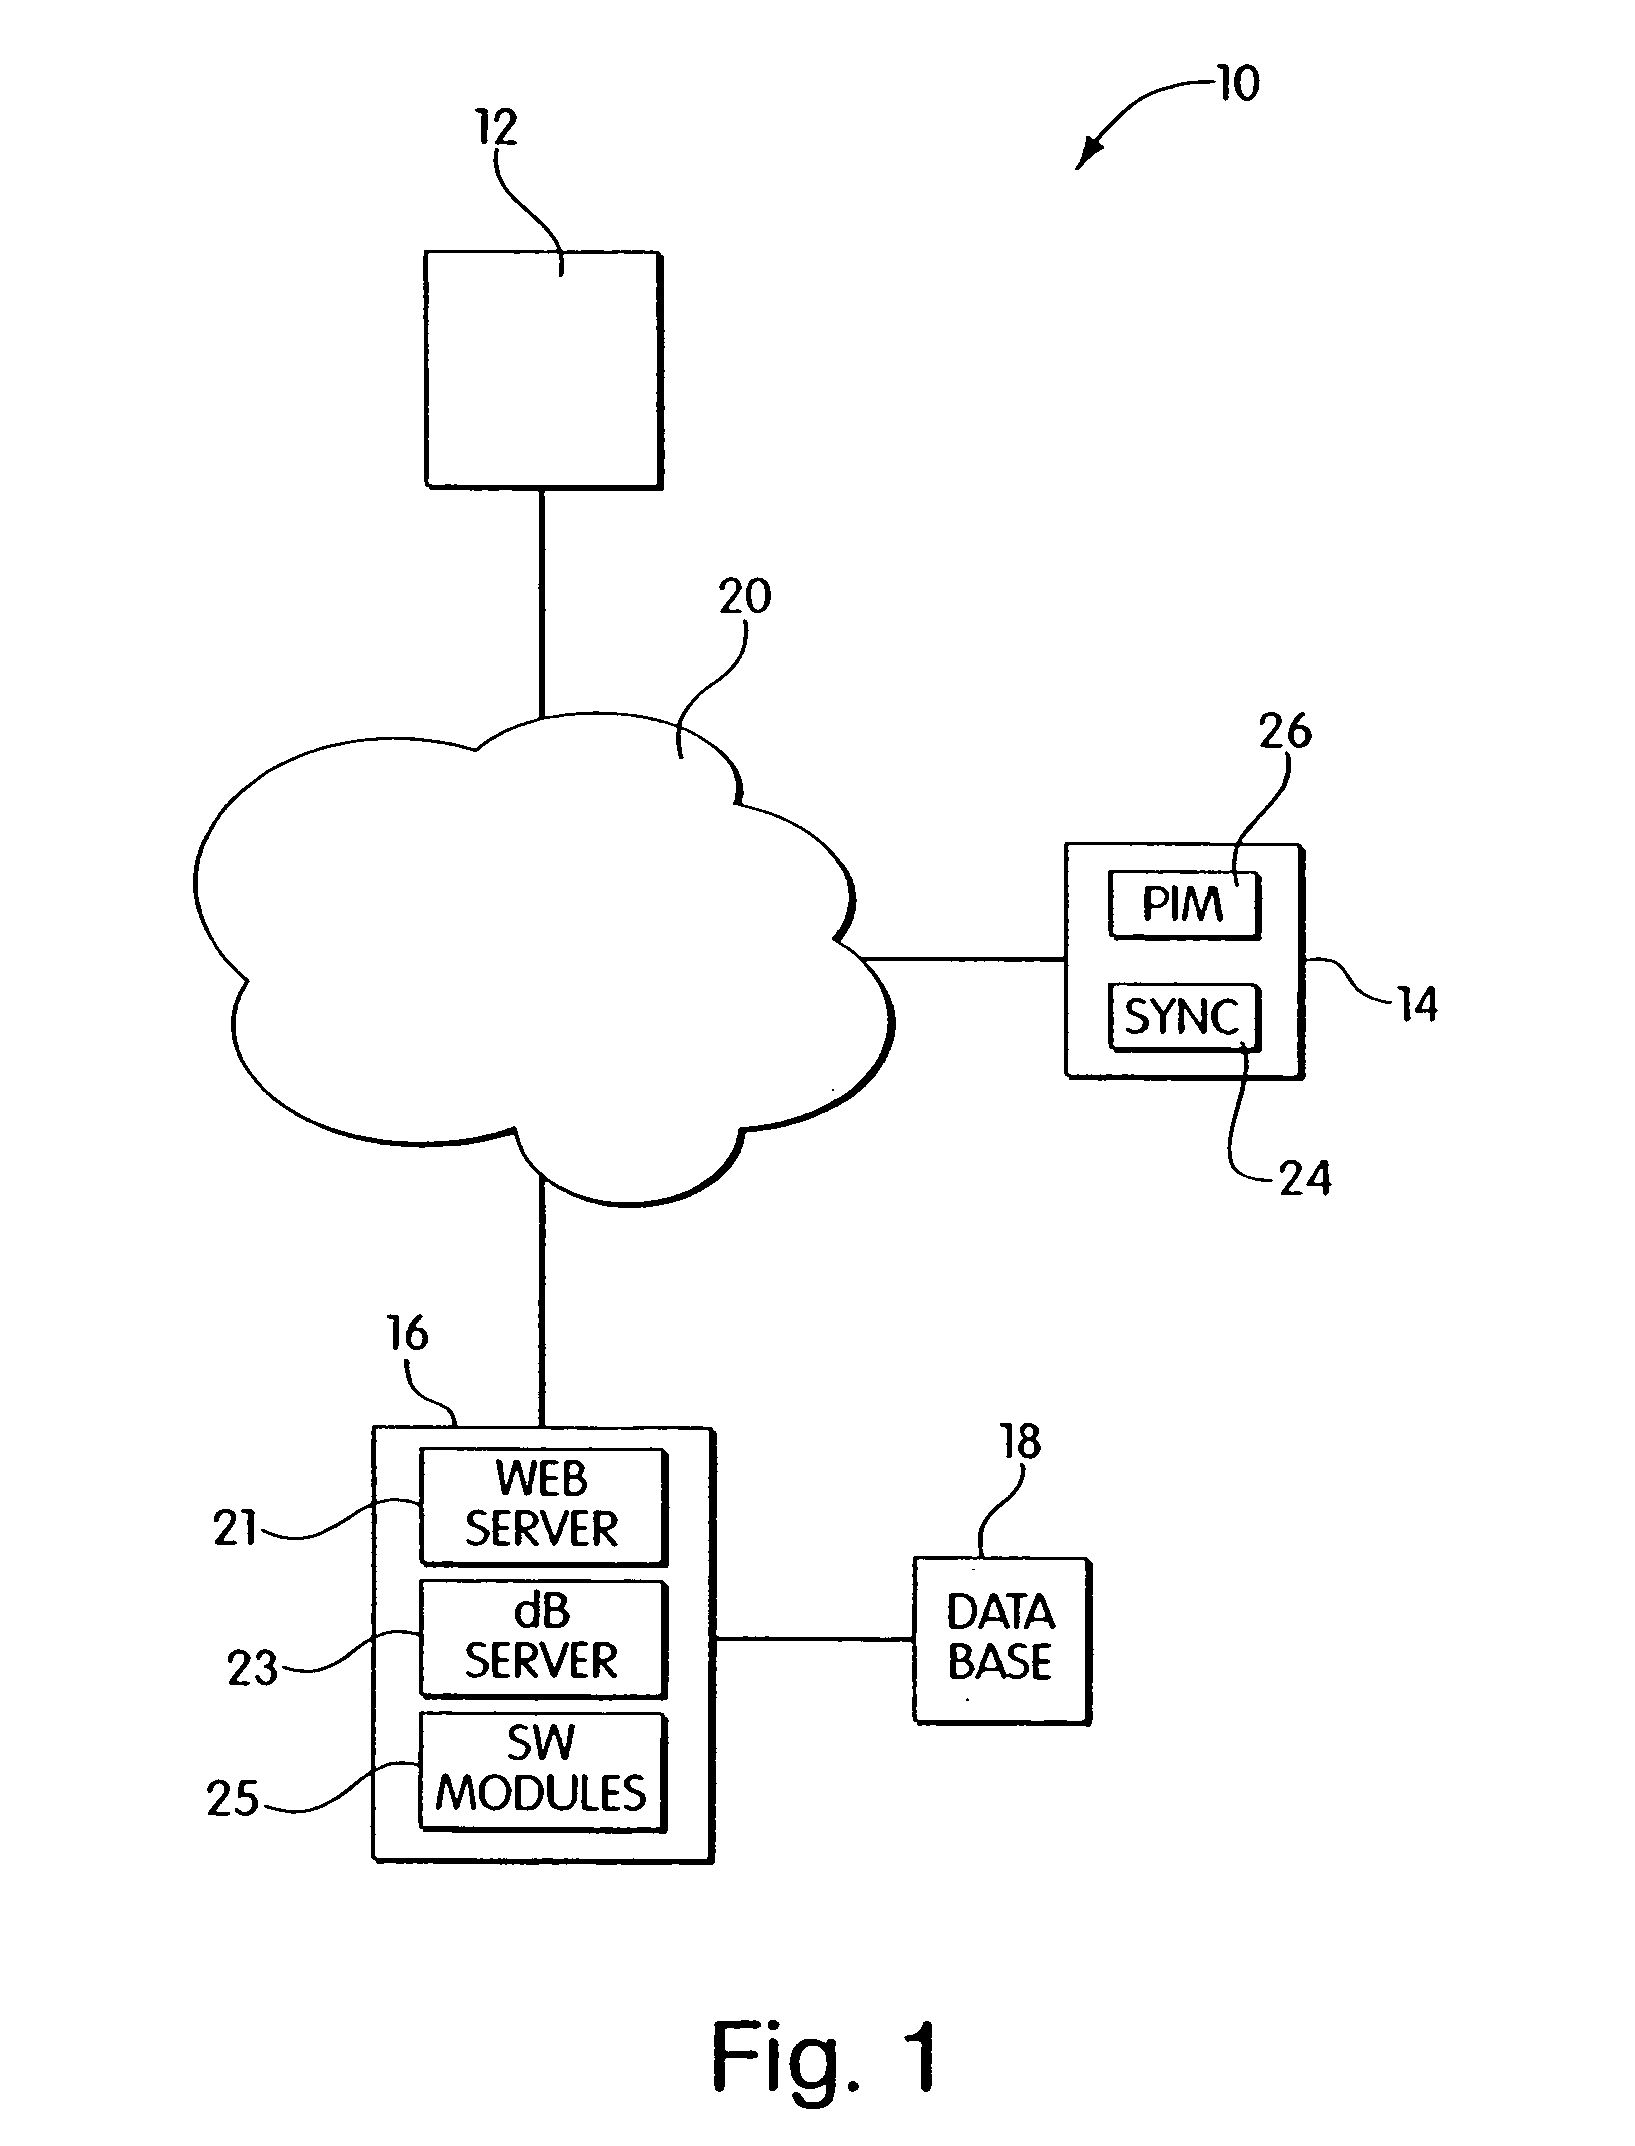 Method and apparatus for storing and retrieving business contact information in a computer system